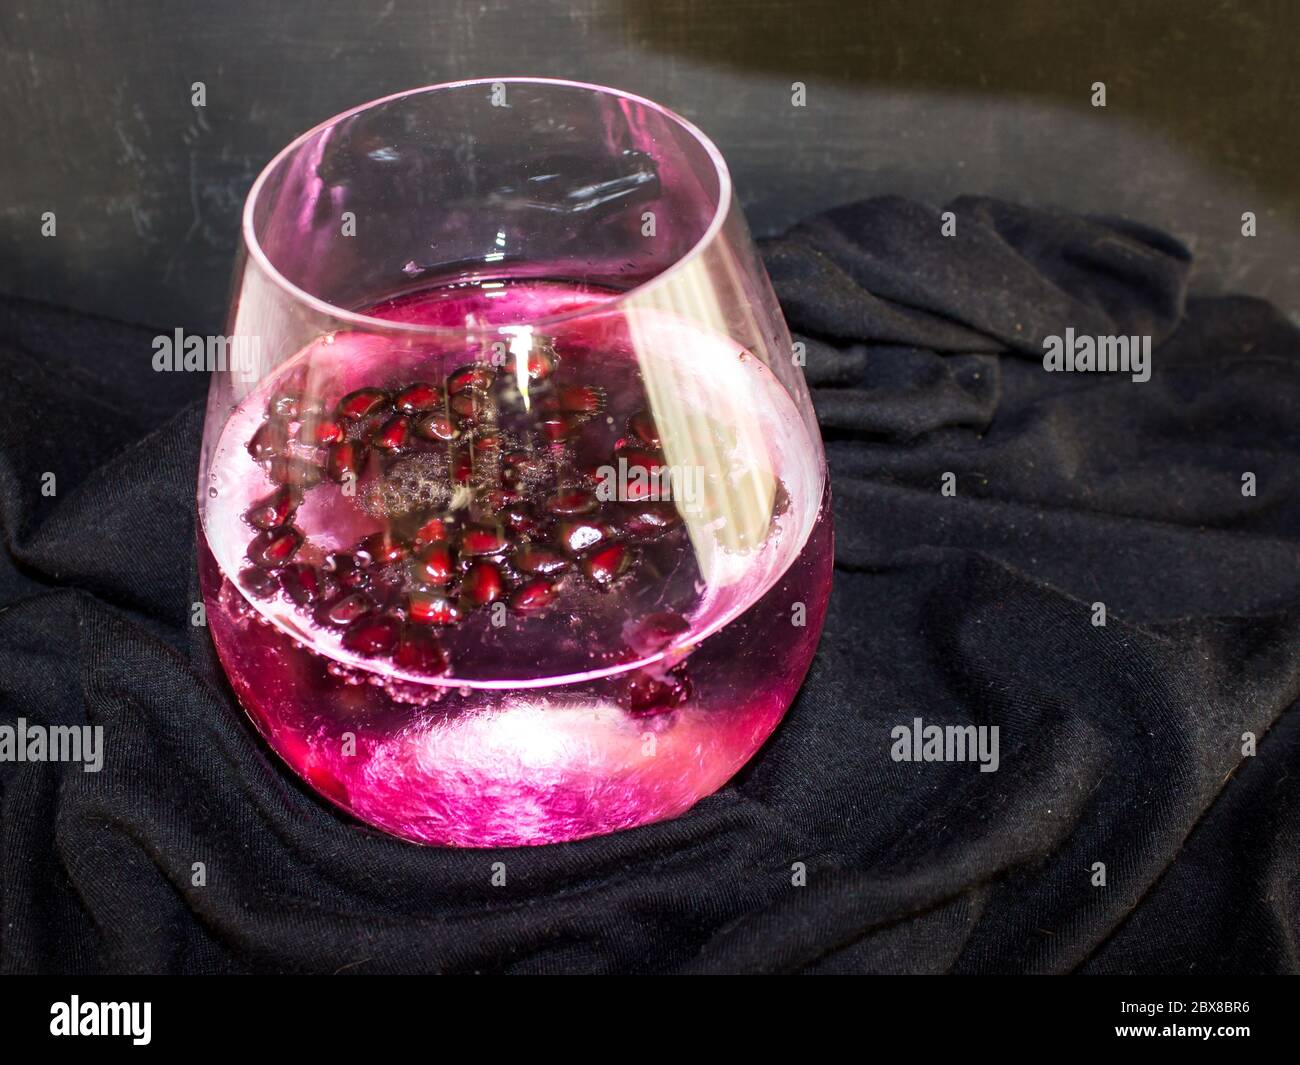 A red Pomegranate, Gin and Tonic, garnished with large amount of Pomegranate pits, on a black background Stock Photo